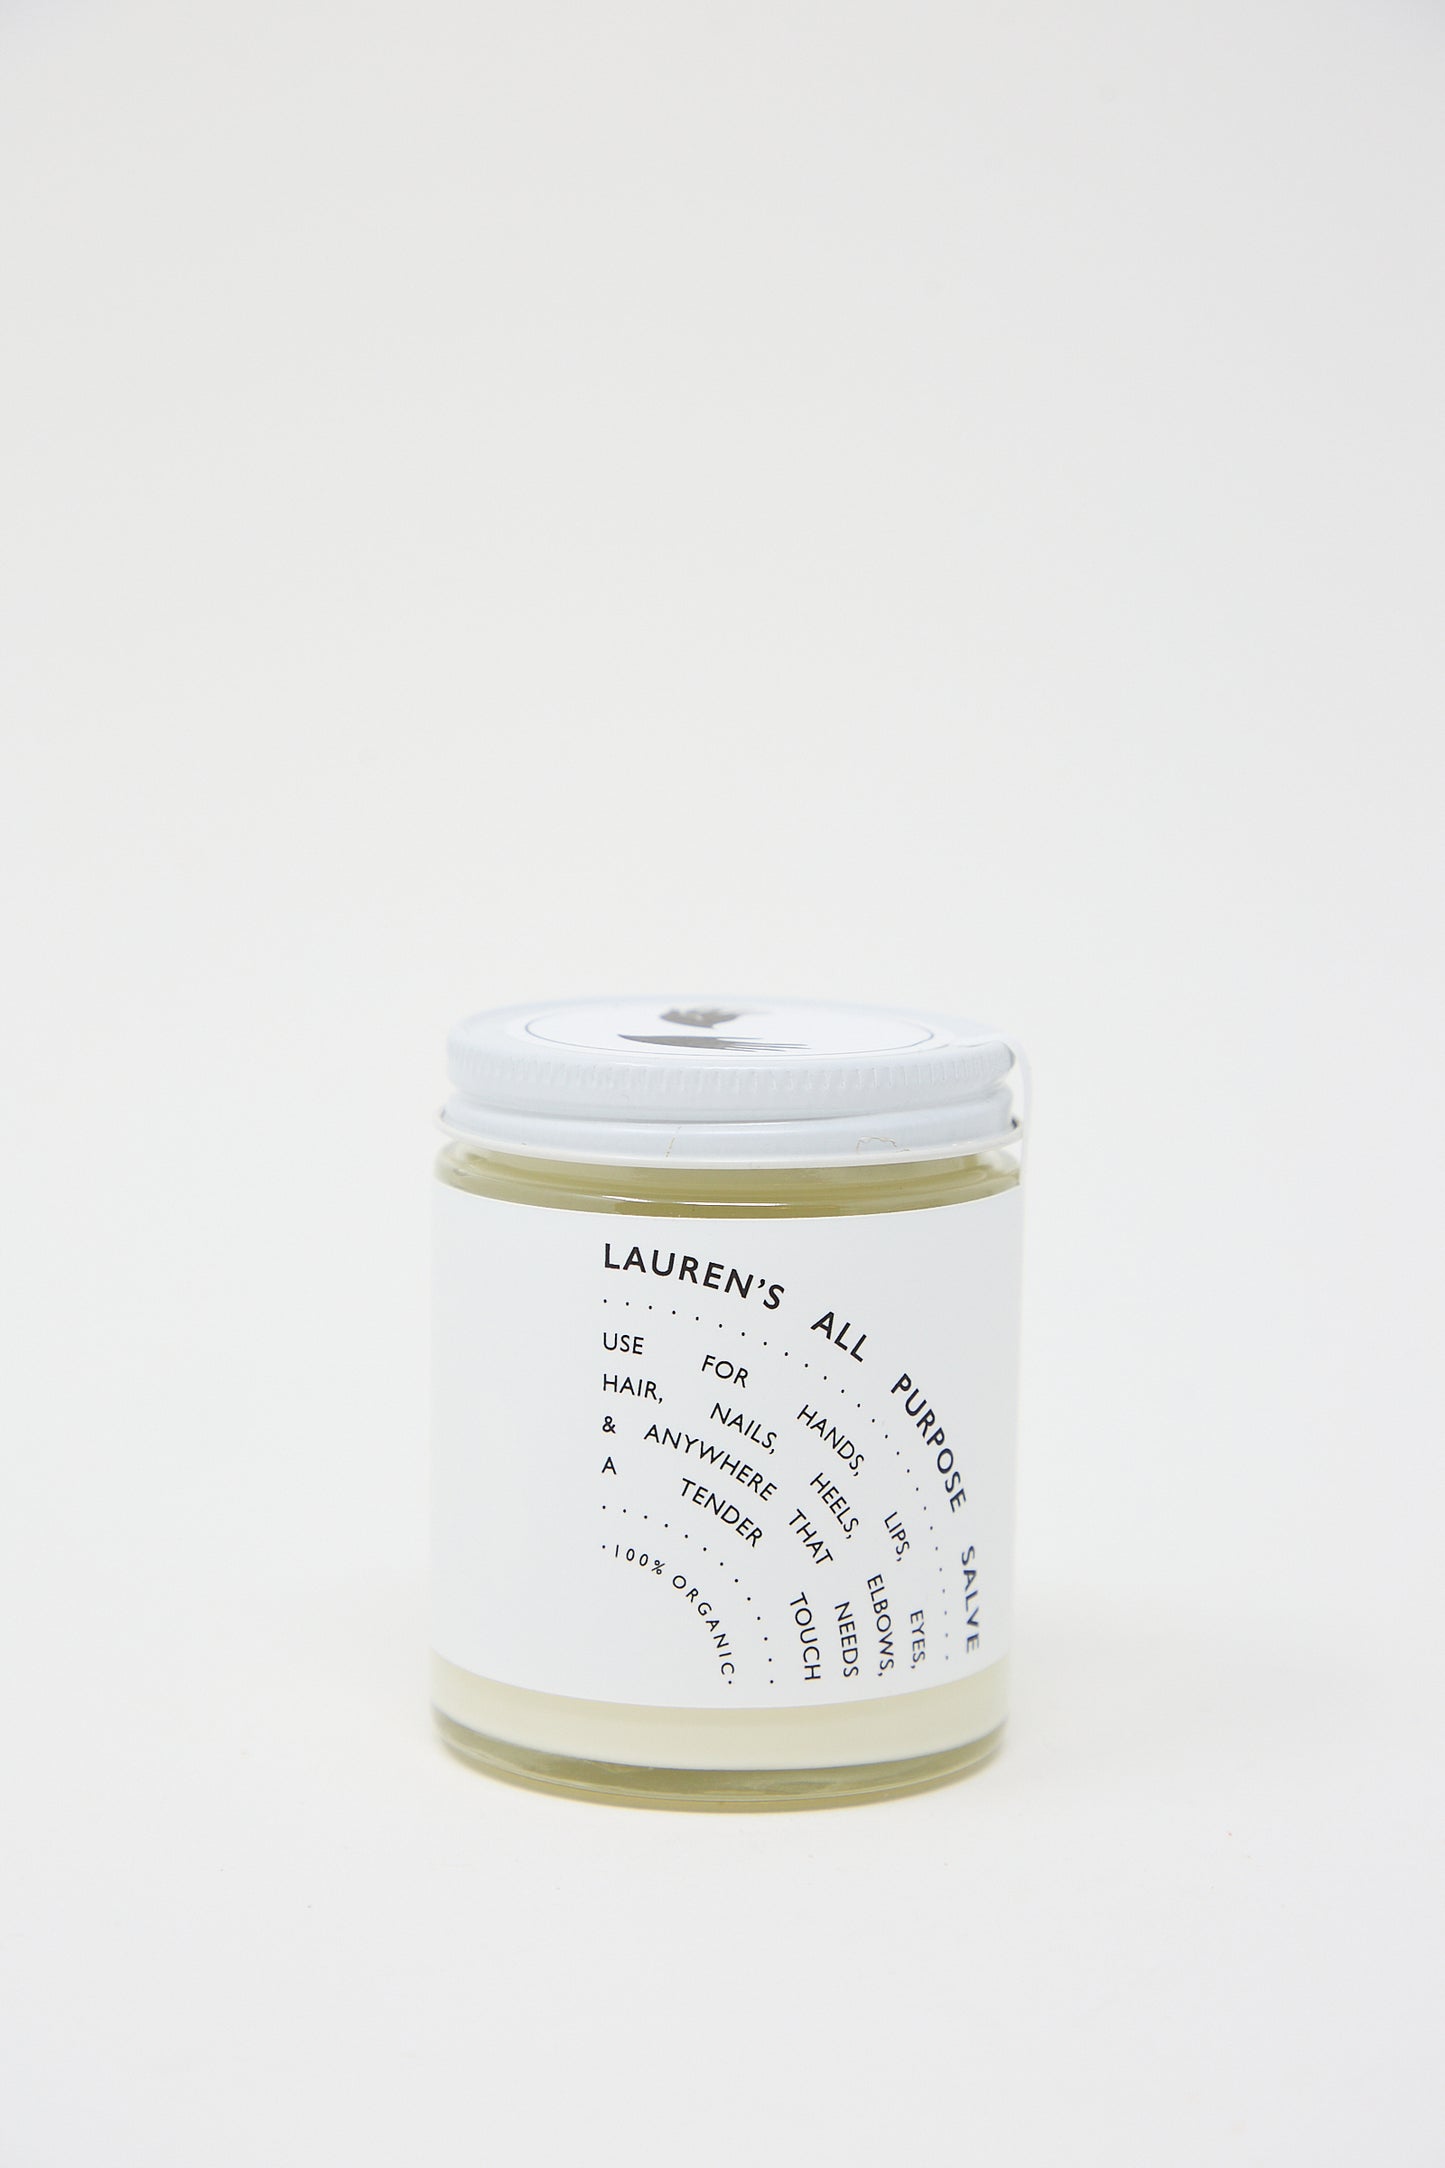 A clear jar labeled "Lauren's All Purpose Salve" from Lauren's All Purpose containing a creamy substance, set against a white background.